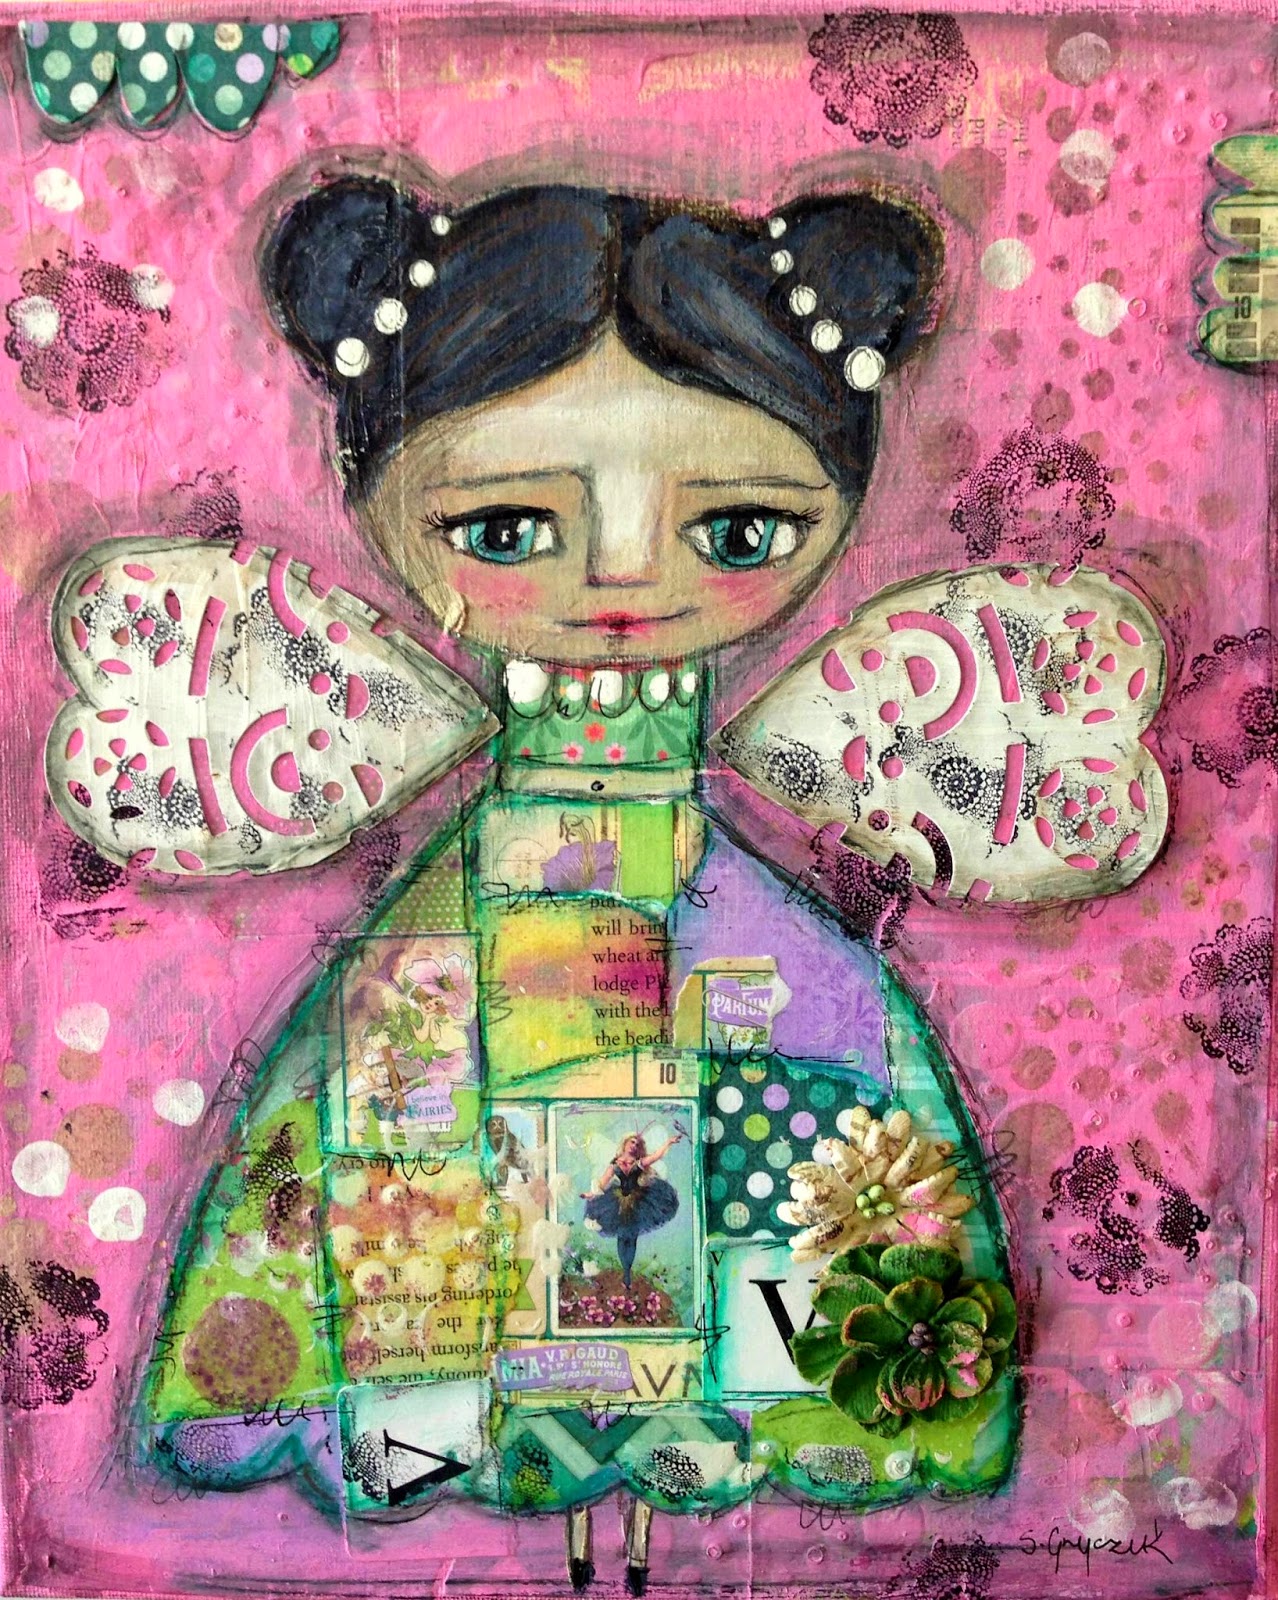 Cardz 'n' Scrapz: 'You are my fairy'- mixed media canvas by Sylwia